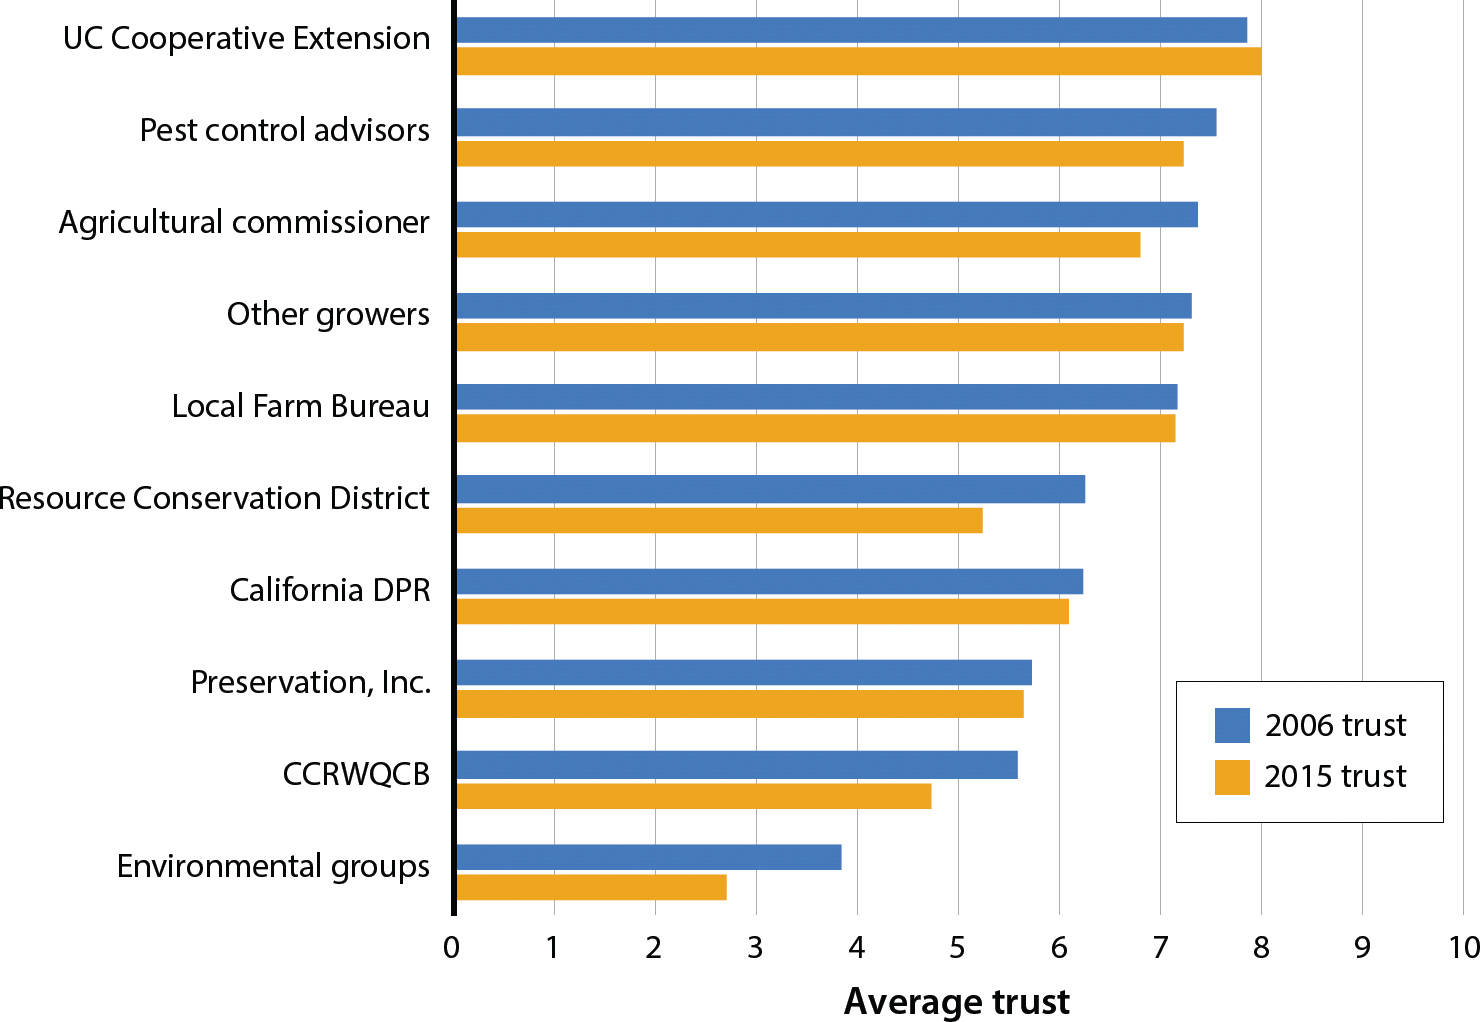 Growers' trust of different water quality organizations in 2006 and 2015.